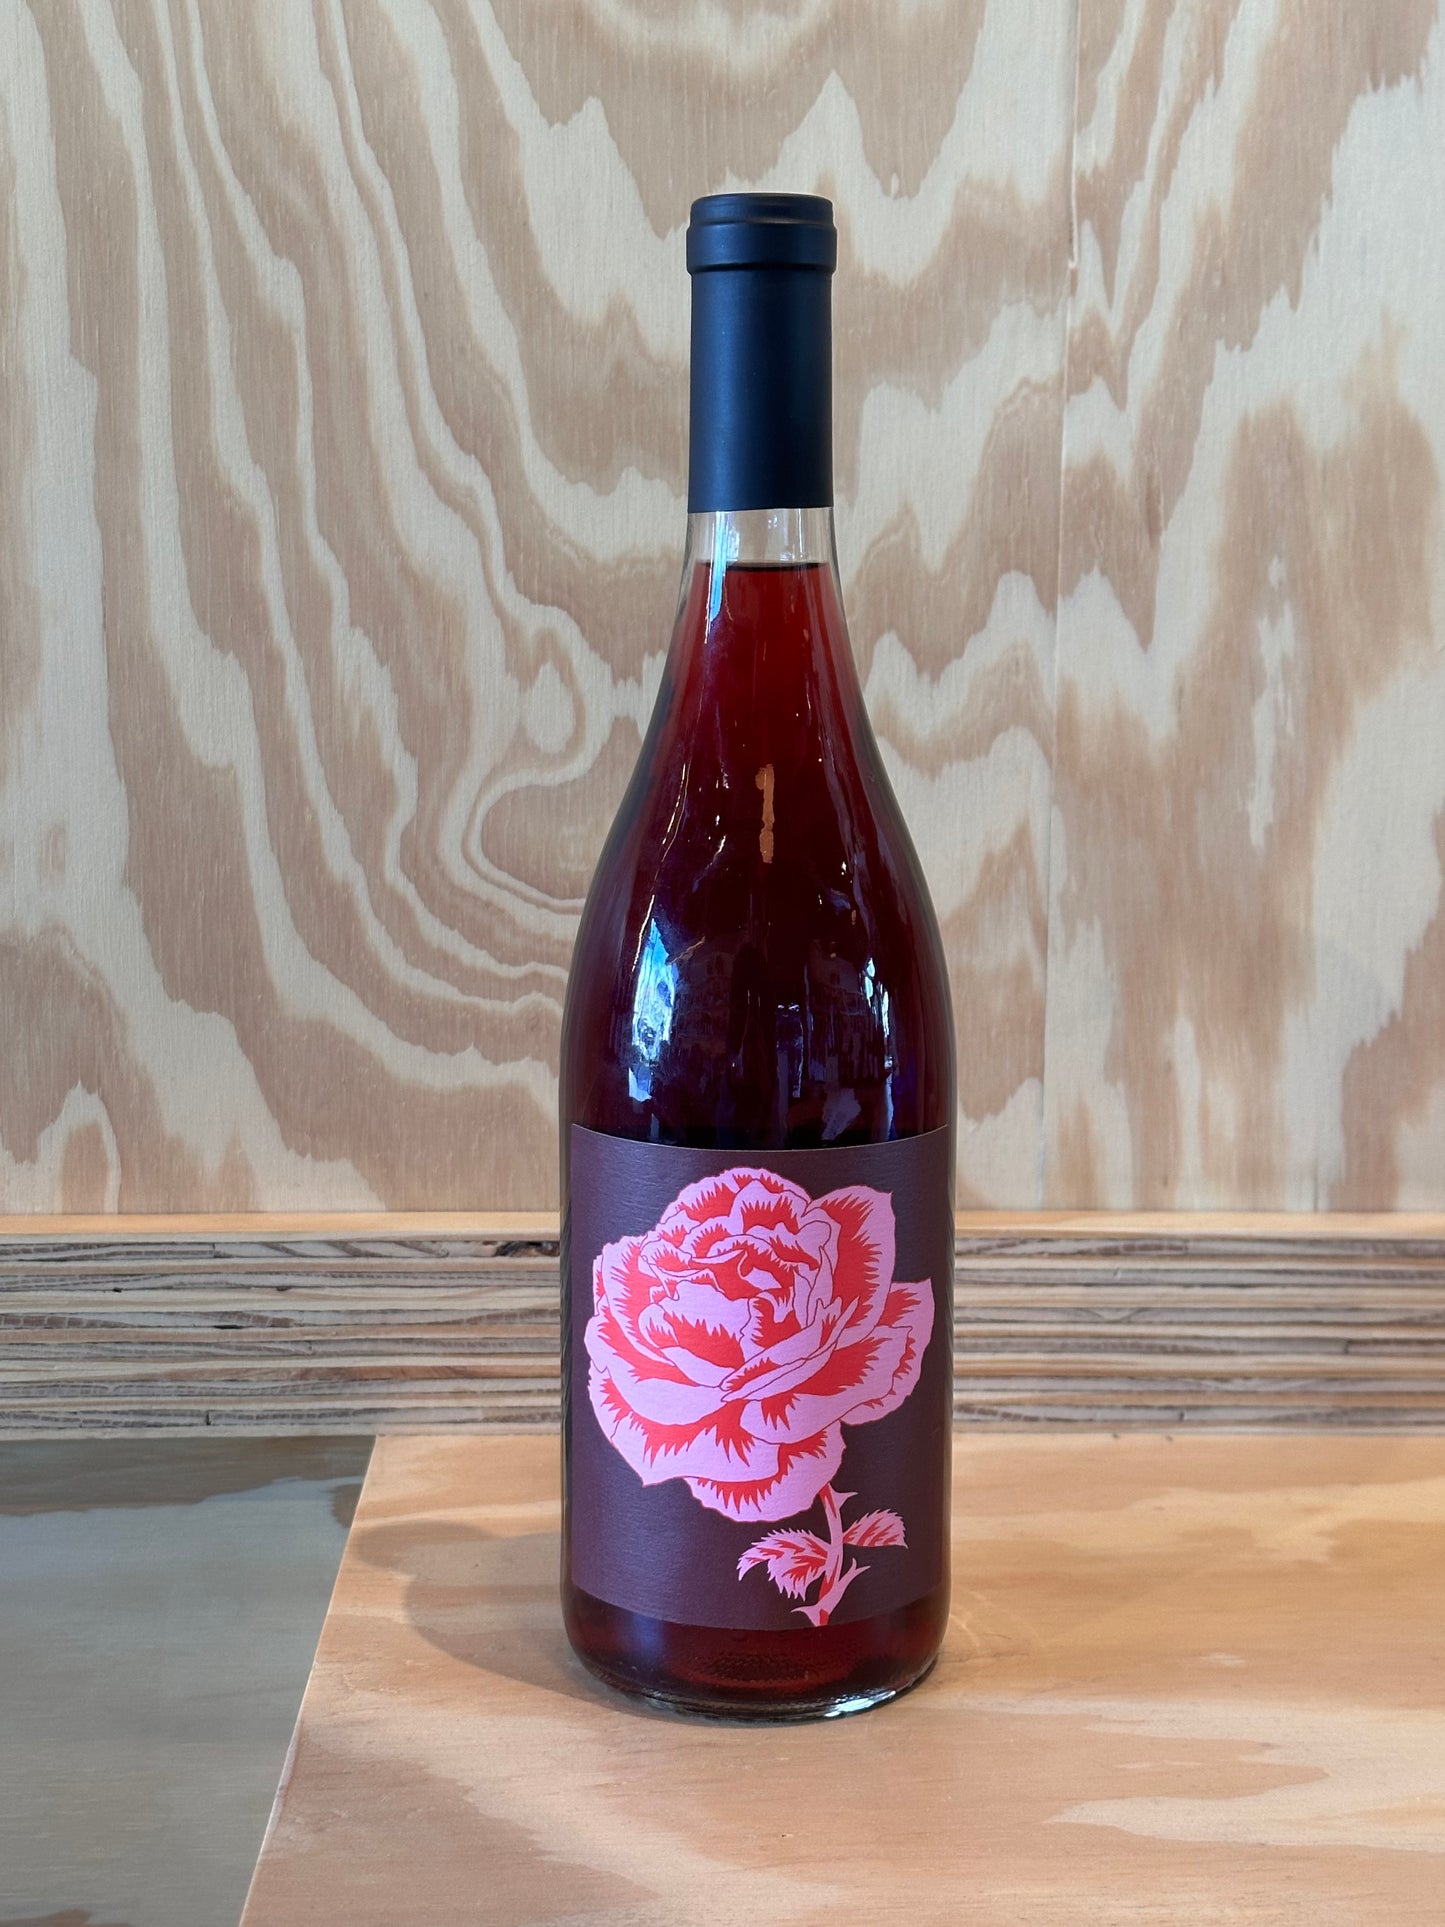 Old World Winery 2021 "Bloom"